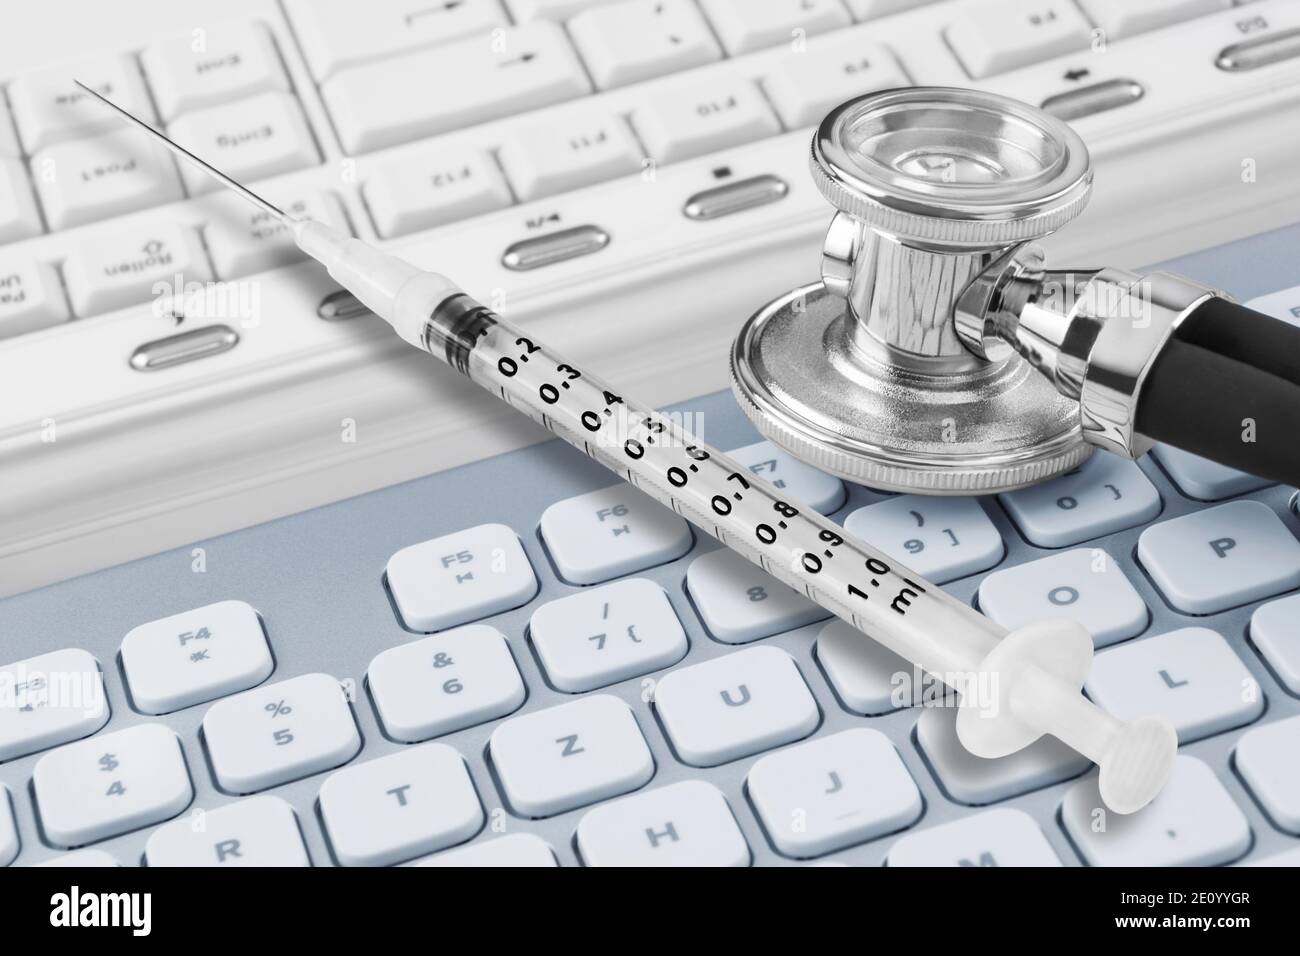 Injection and stethoscope against PC keyboard Stock Photo